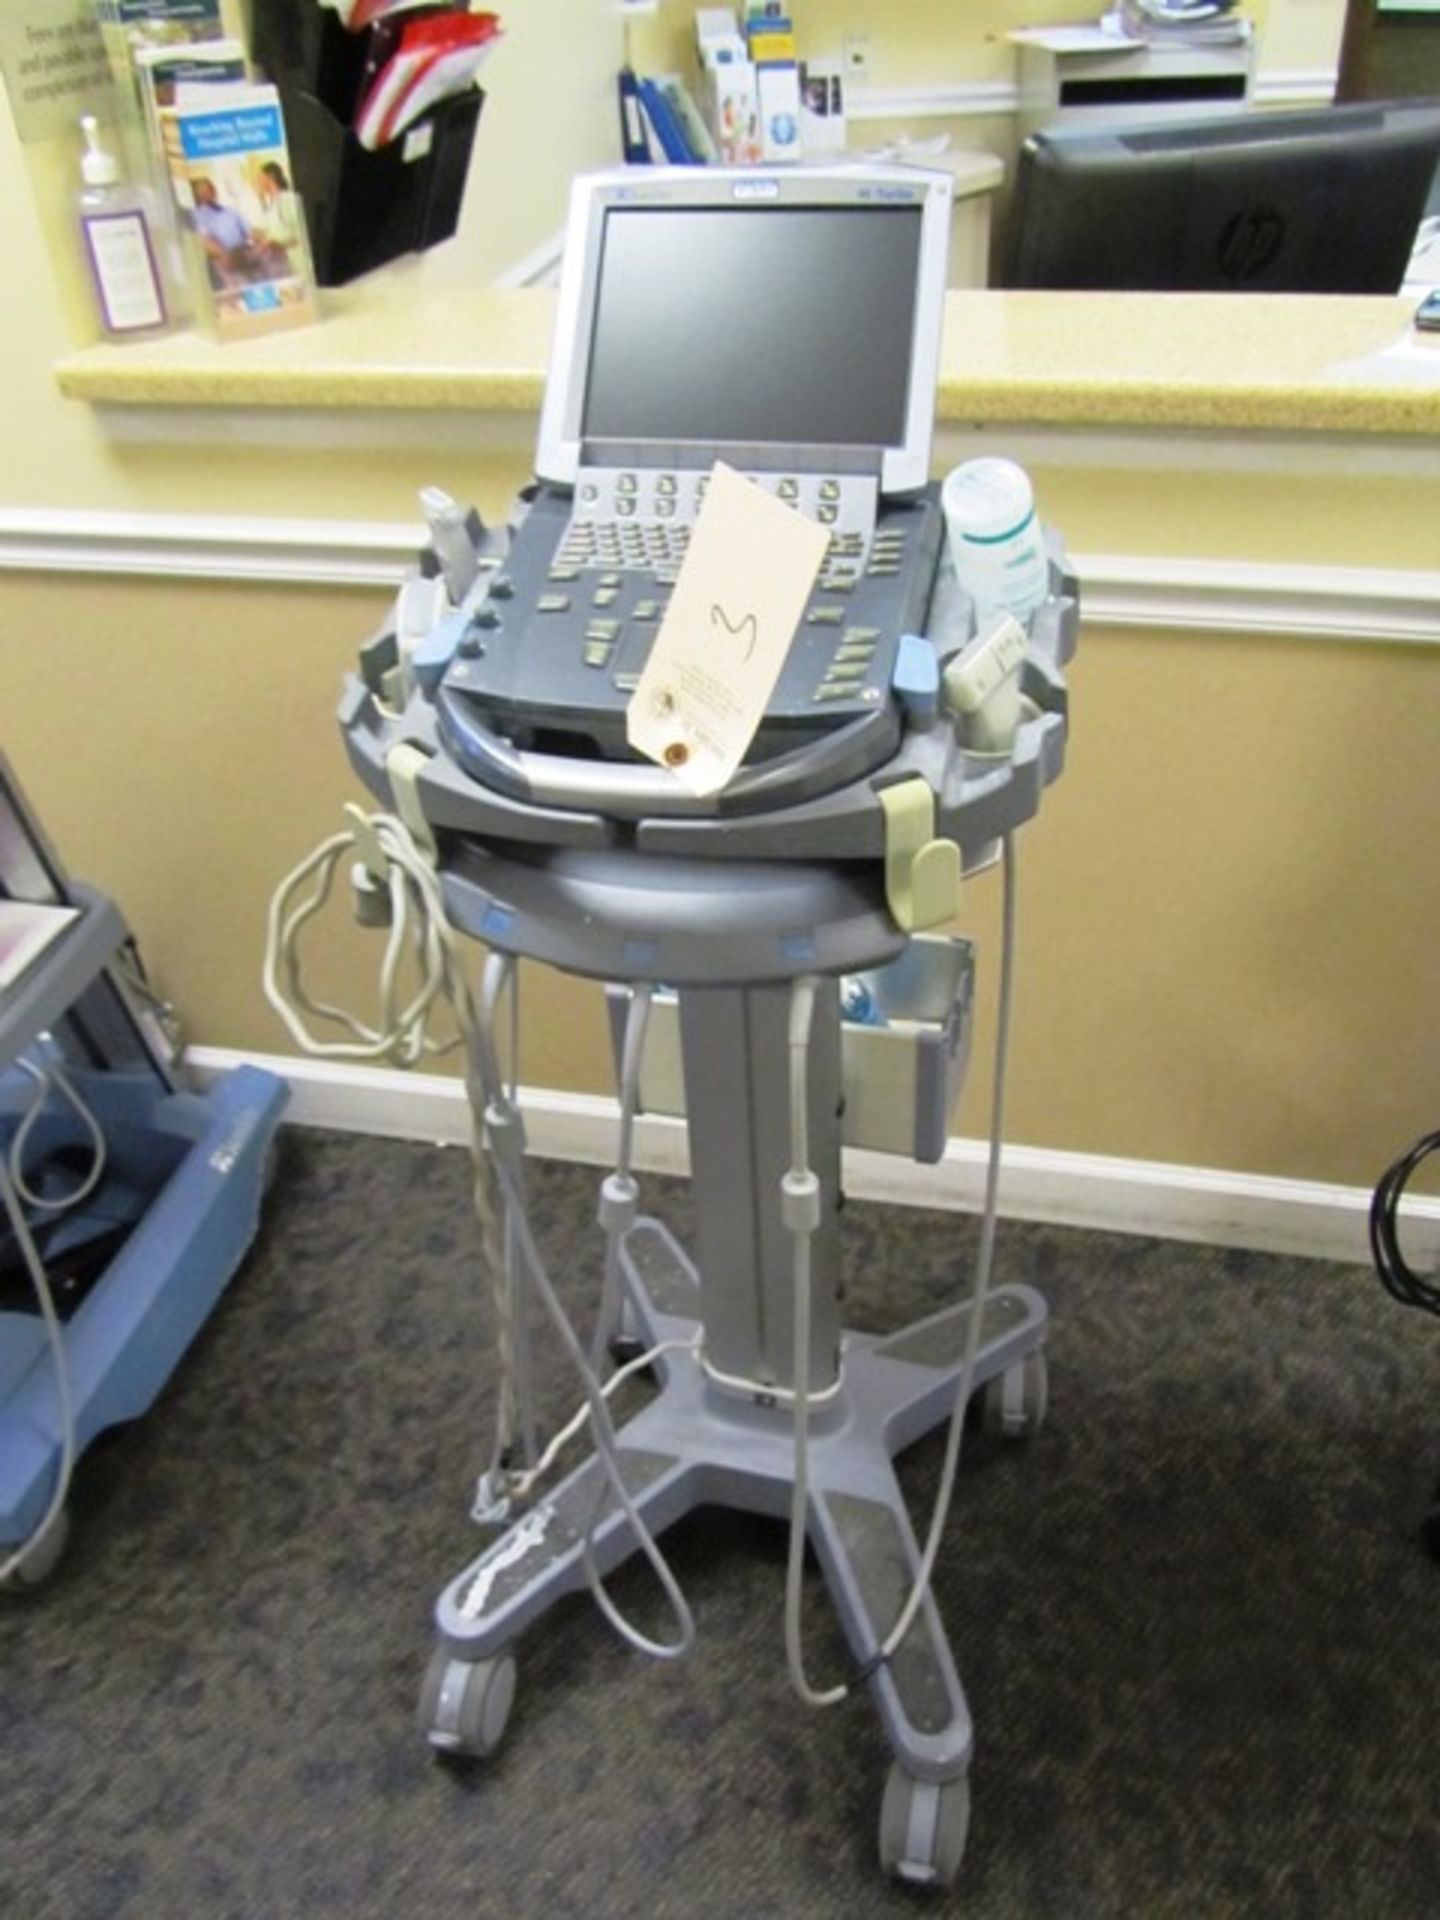 Sonosite M-Turbo Ultrasound Machine with (3) Transducers & Portable Stand, Injection Software for